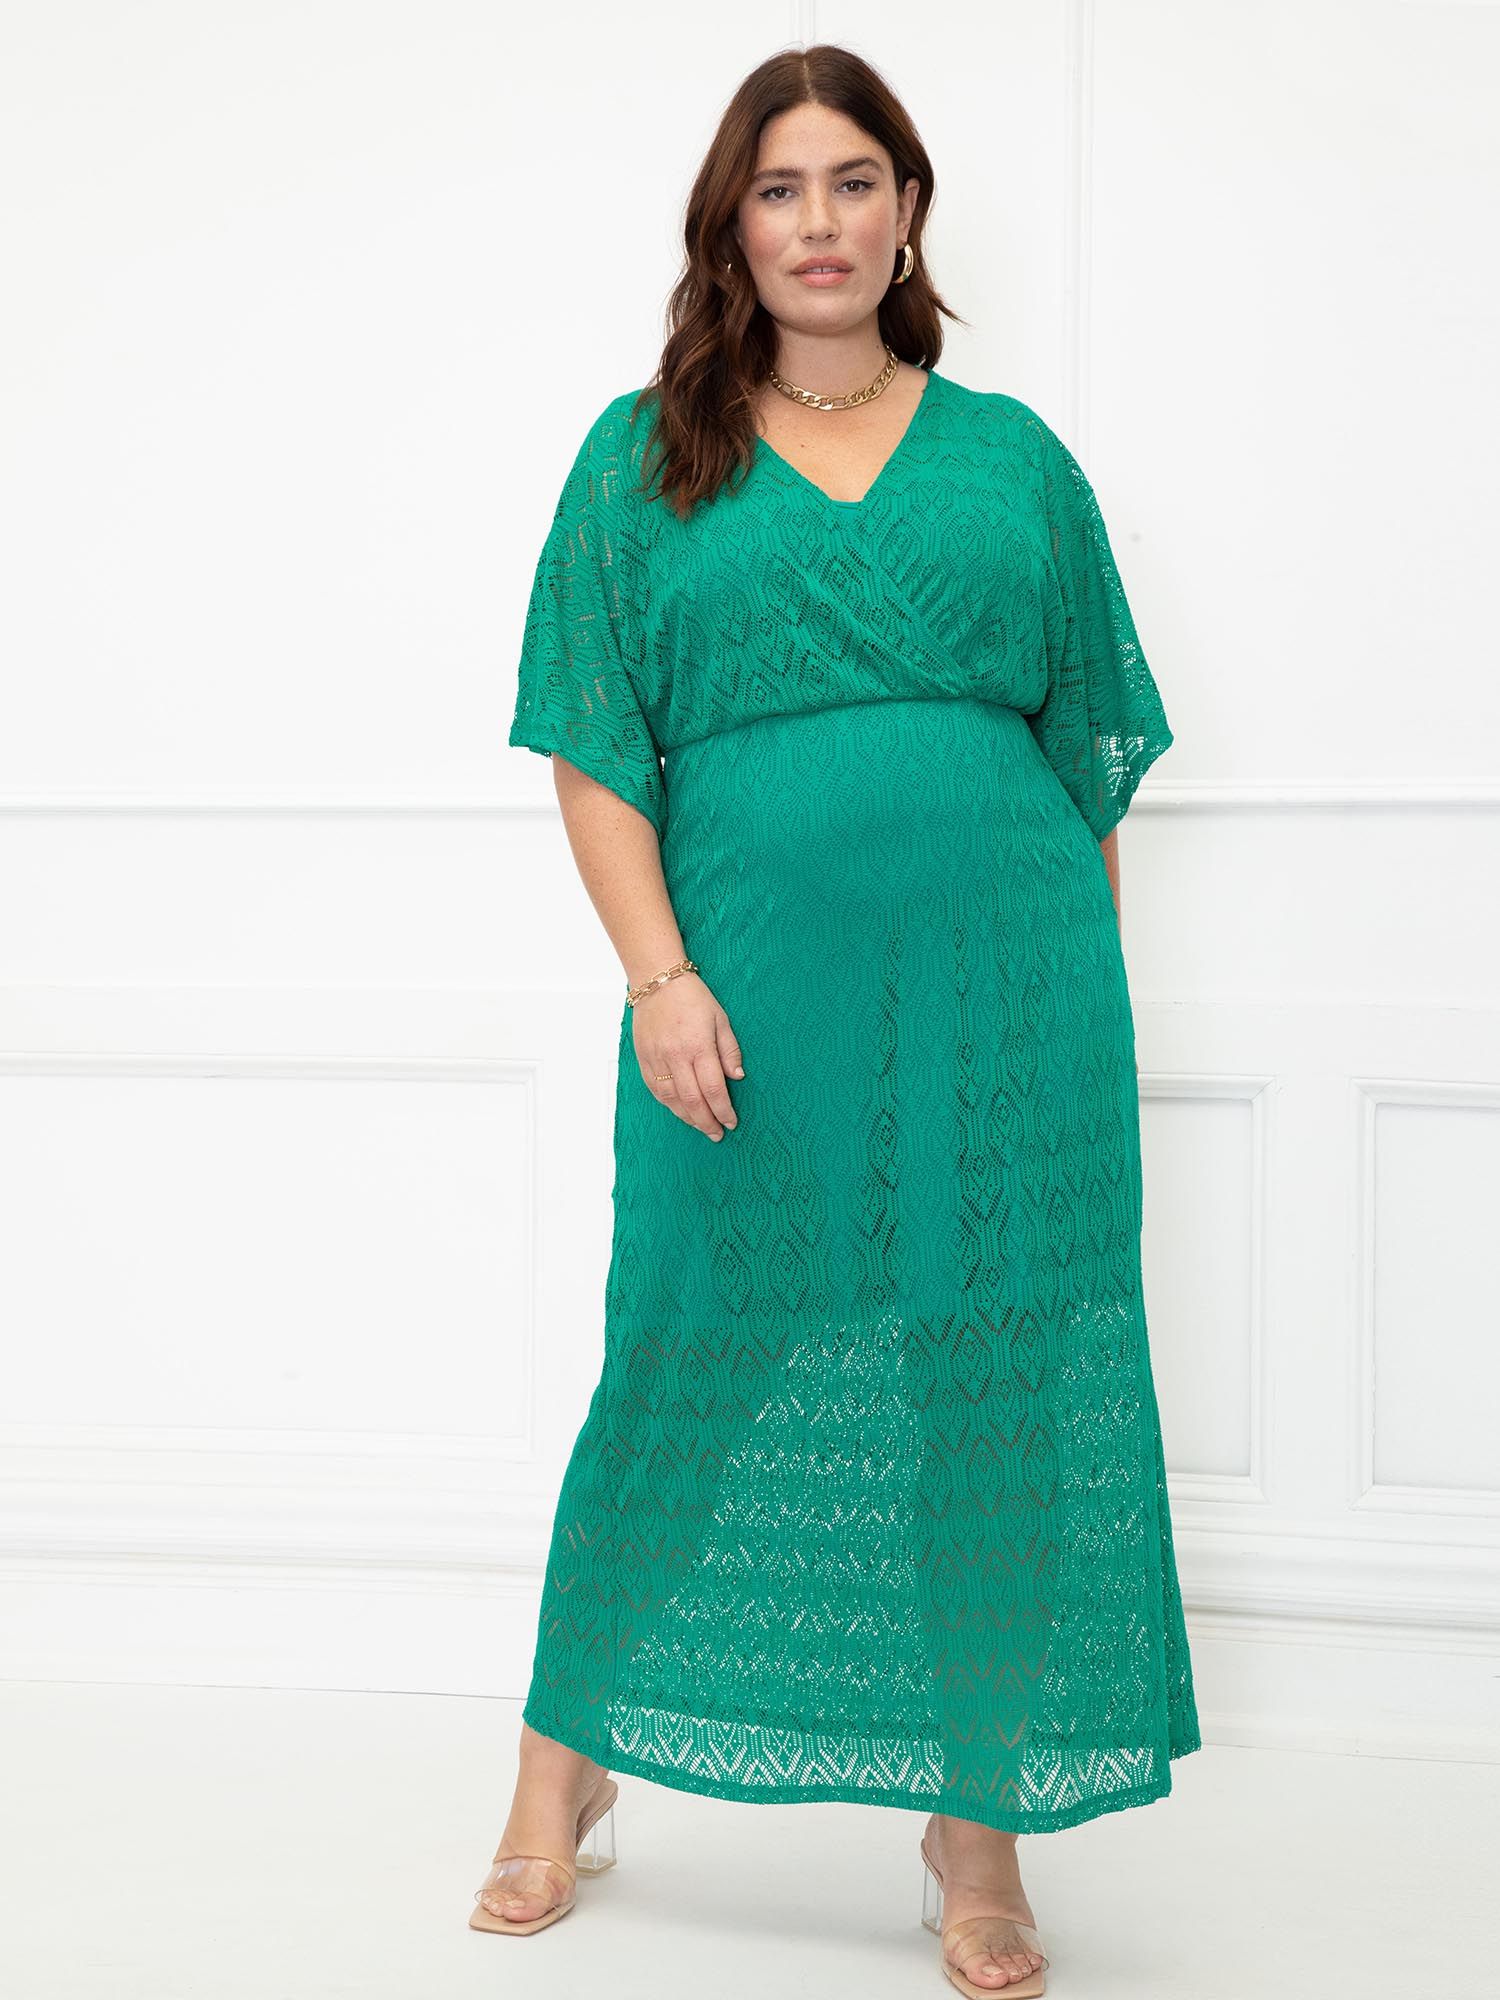 20 Plus-Size Maxi Dresses for Summer 2022